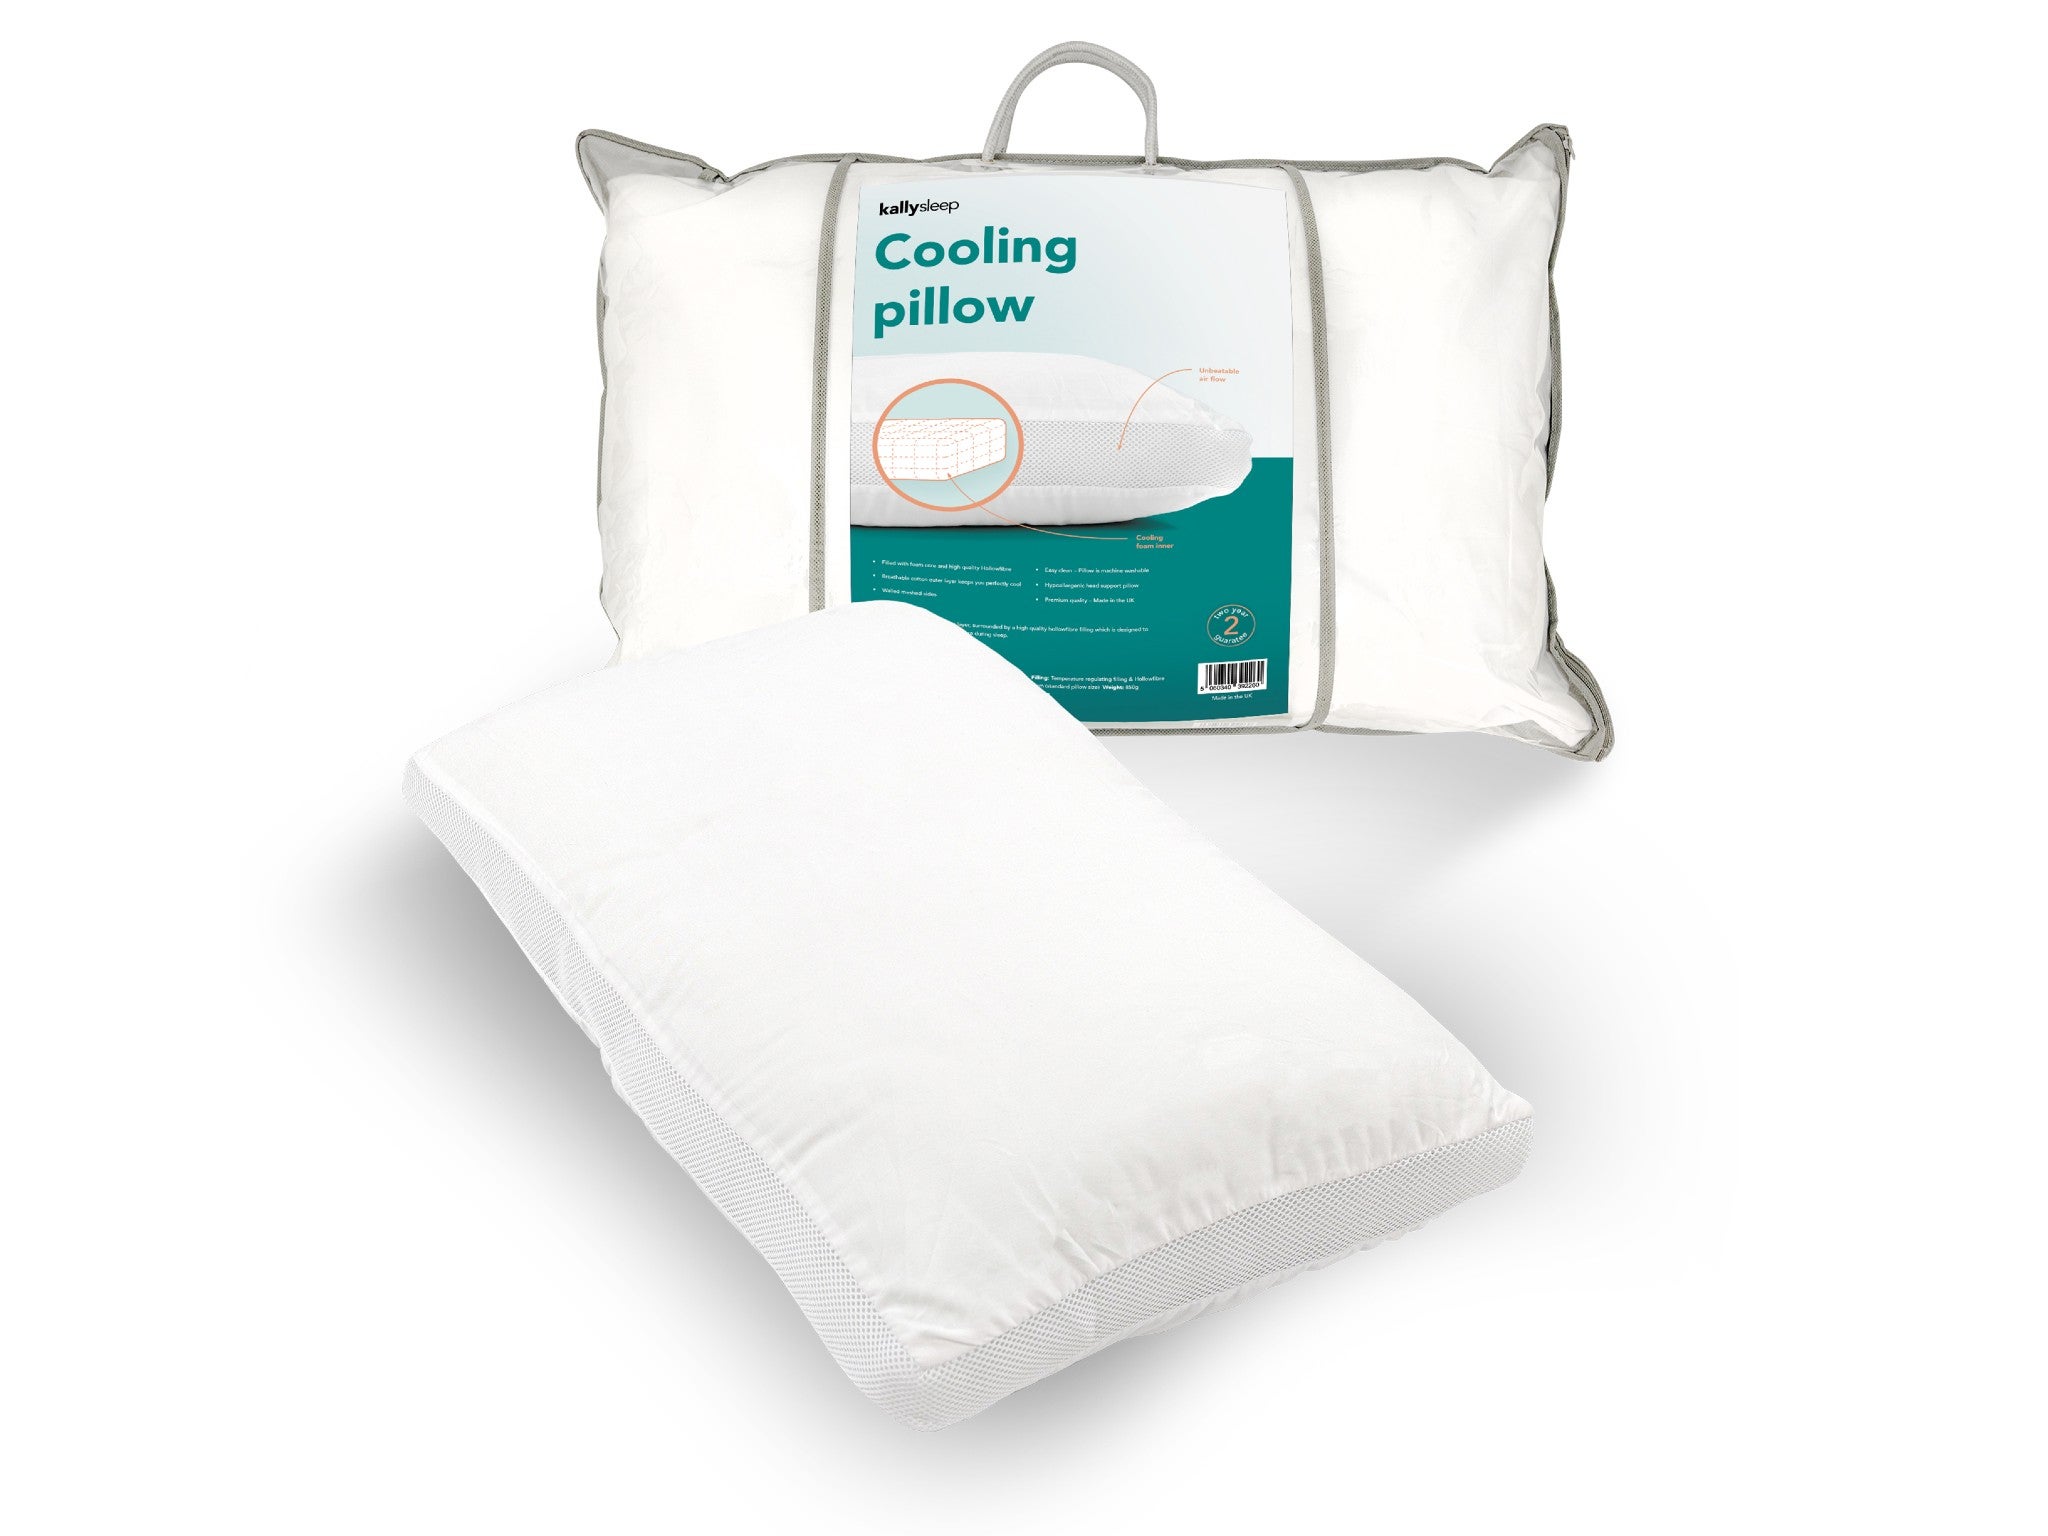 Kally Sleep cooling pillow indybest